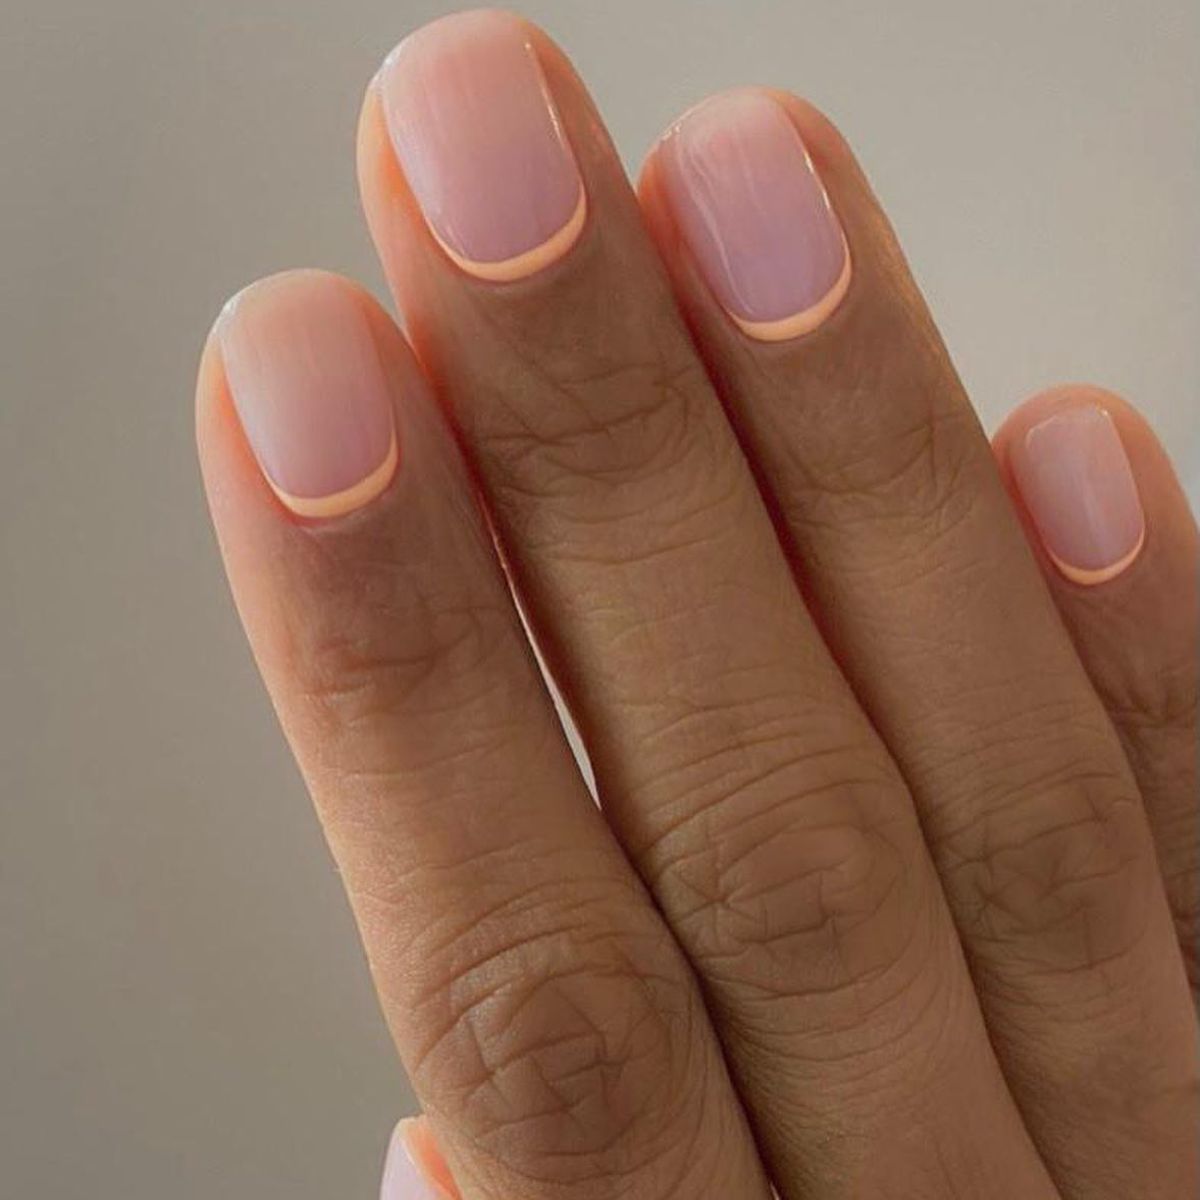 Best nail polish: 12 best nail polish for pretty hands starting at just  Rs.75 - The Economic Times